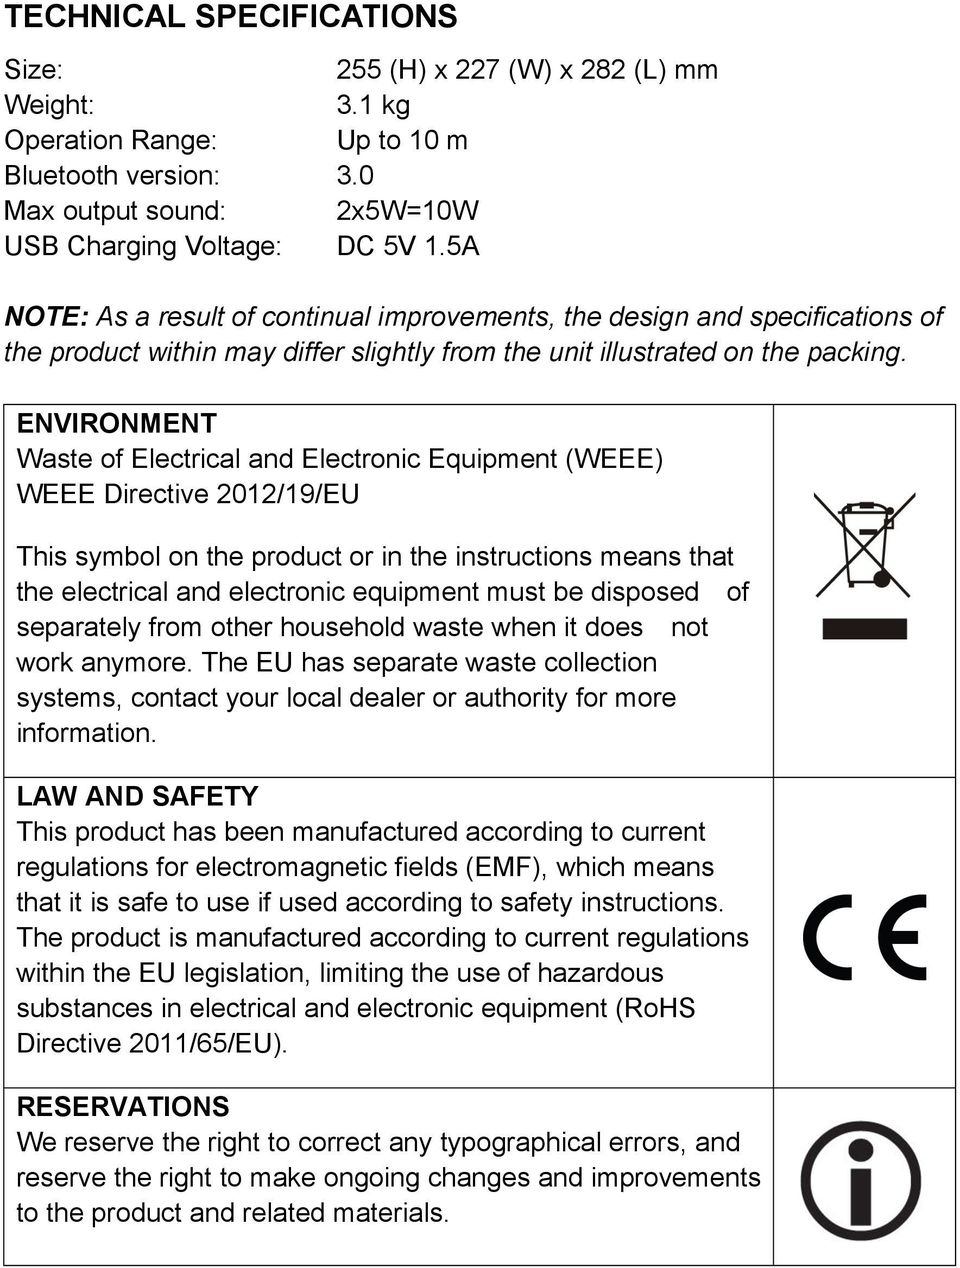 ENVIRONMENT Waste of Electrical and Electronic Equipment (WEEE) WEEE Directive 2012/19/EU This symbol on the product or in the instructions means that the electrical and electronic equipment must be